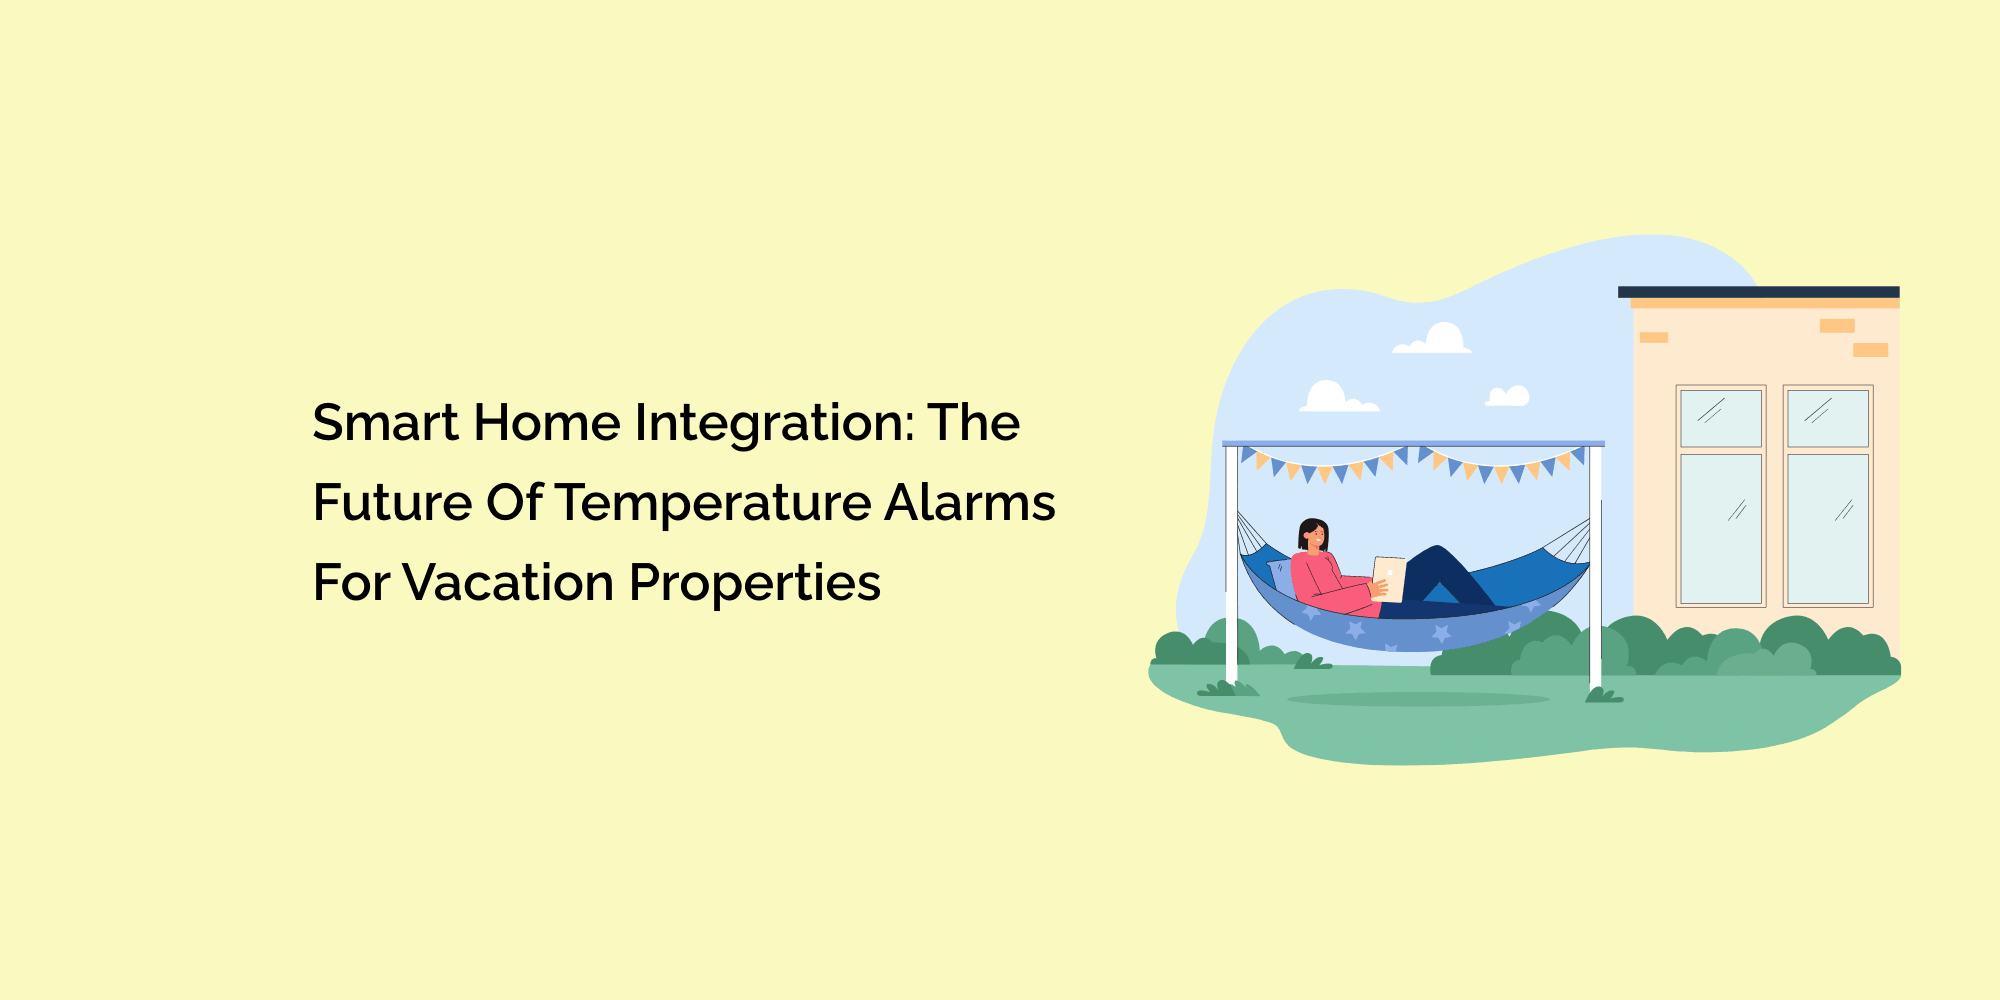 Smart Home Integration: The Future of Temperature Alarms for Vacation Properties